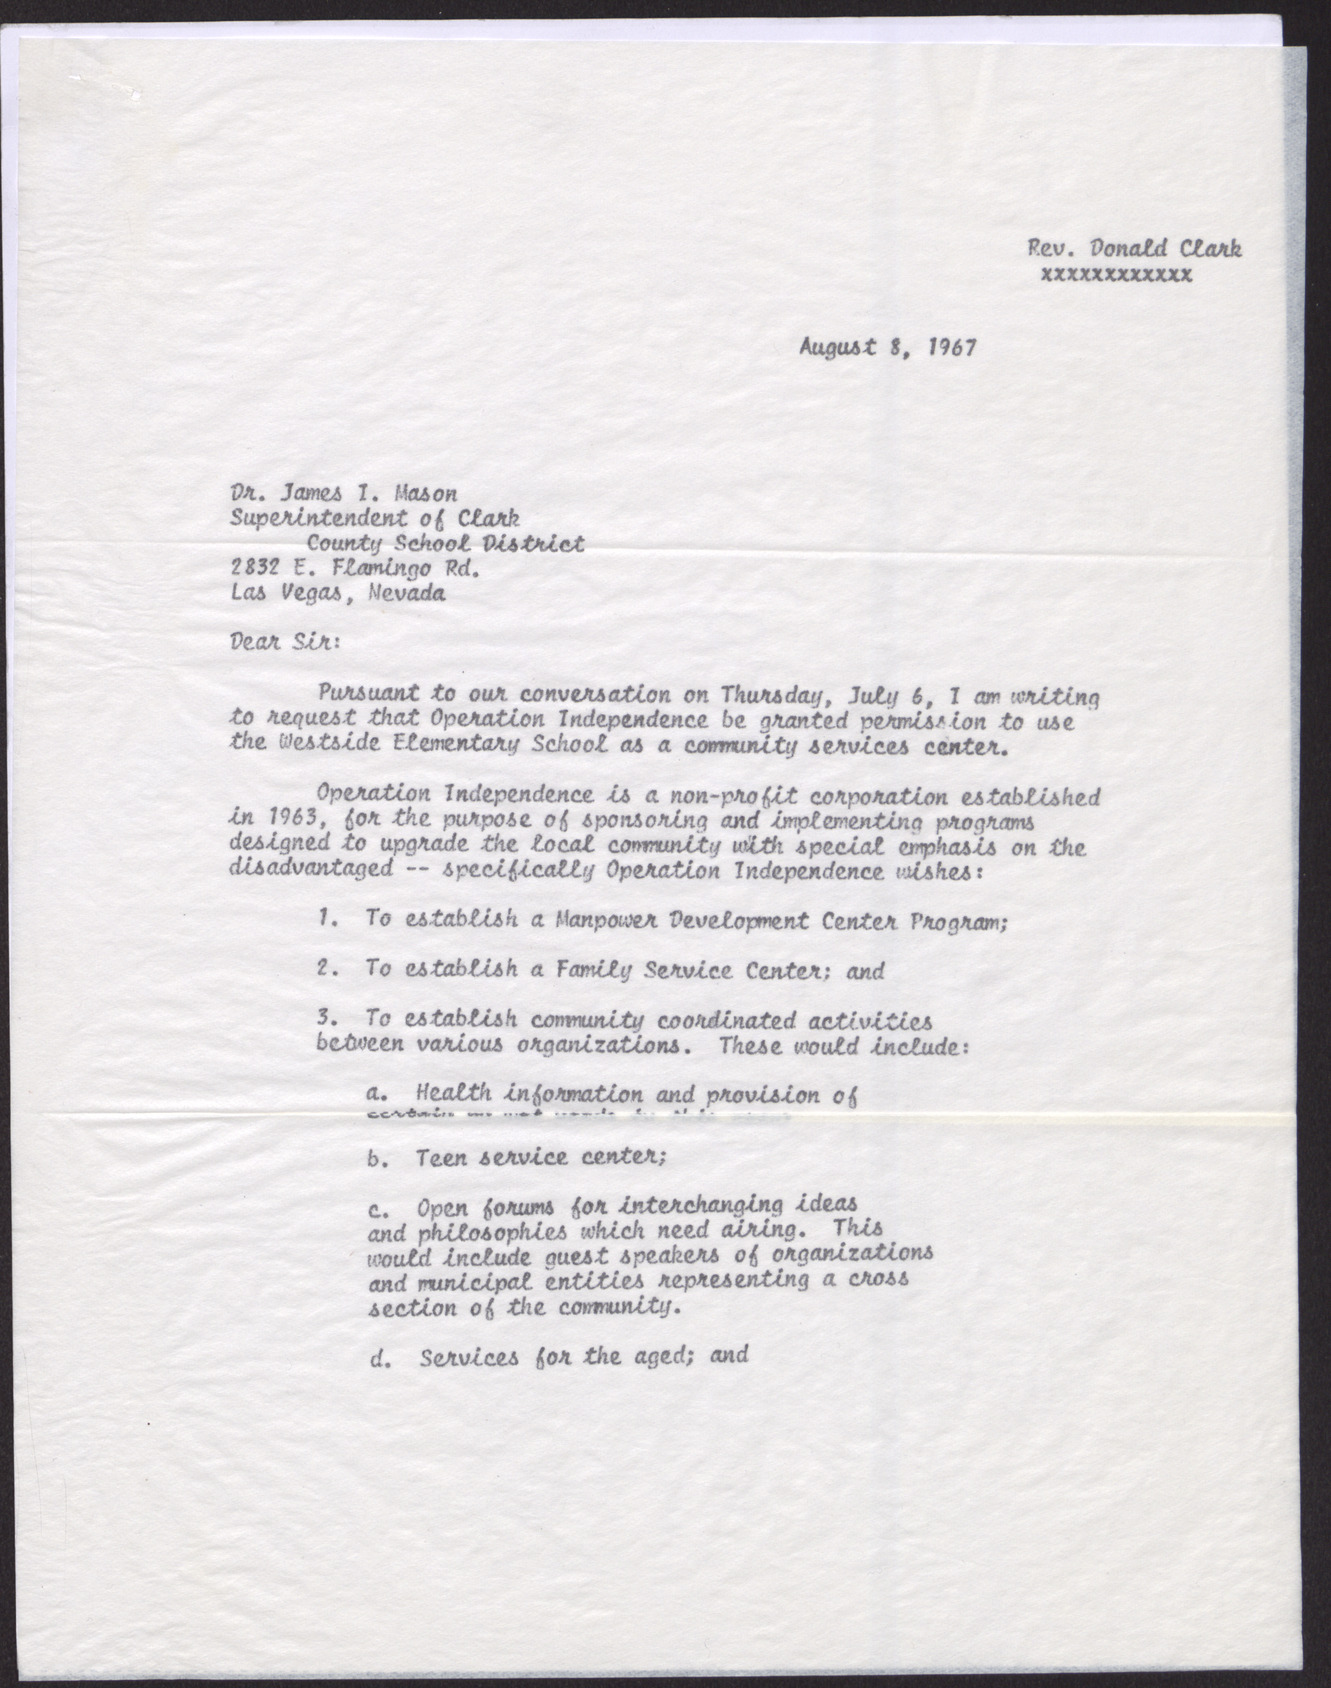 Letter to Dr. James I. Mason from Lubertha M. Johnson (2 pages), August 8, 1967